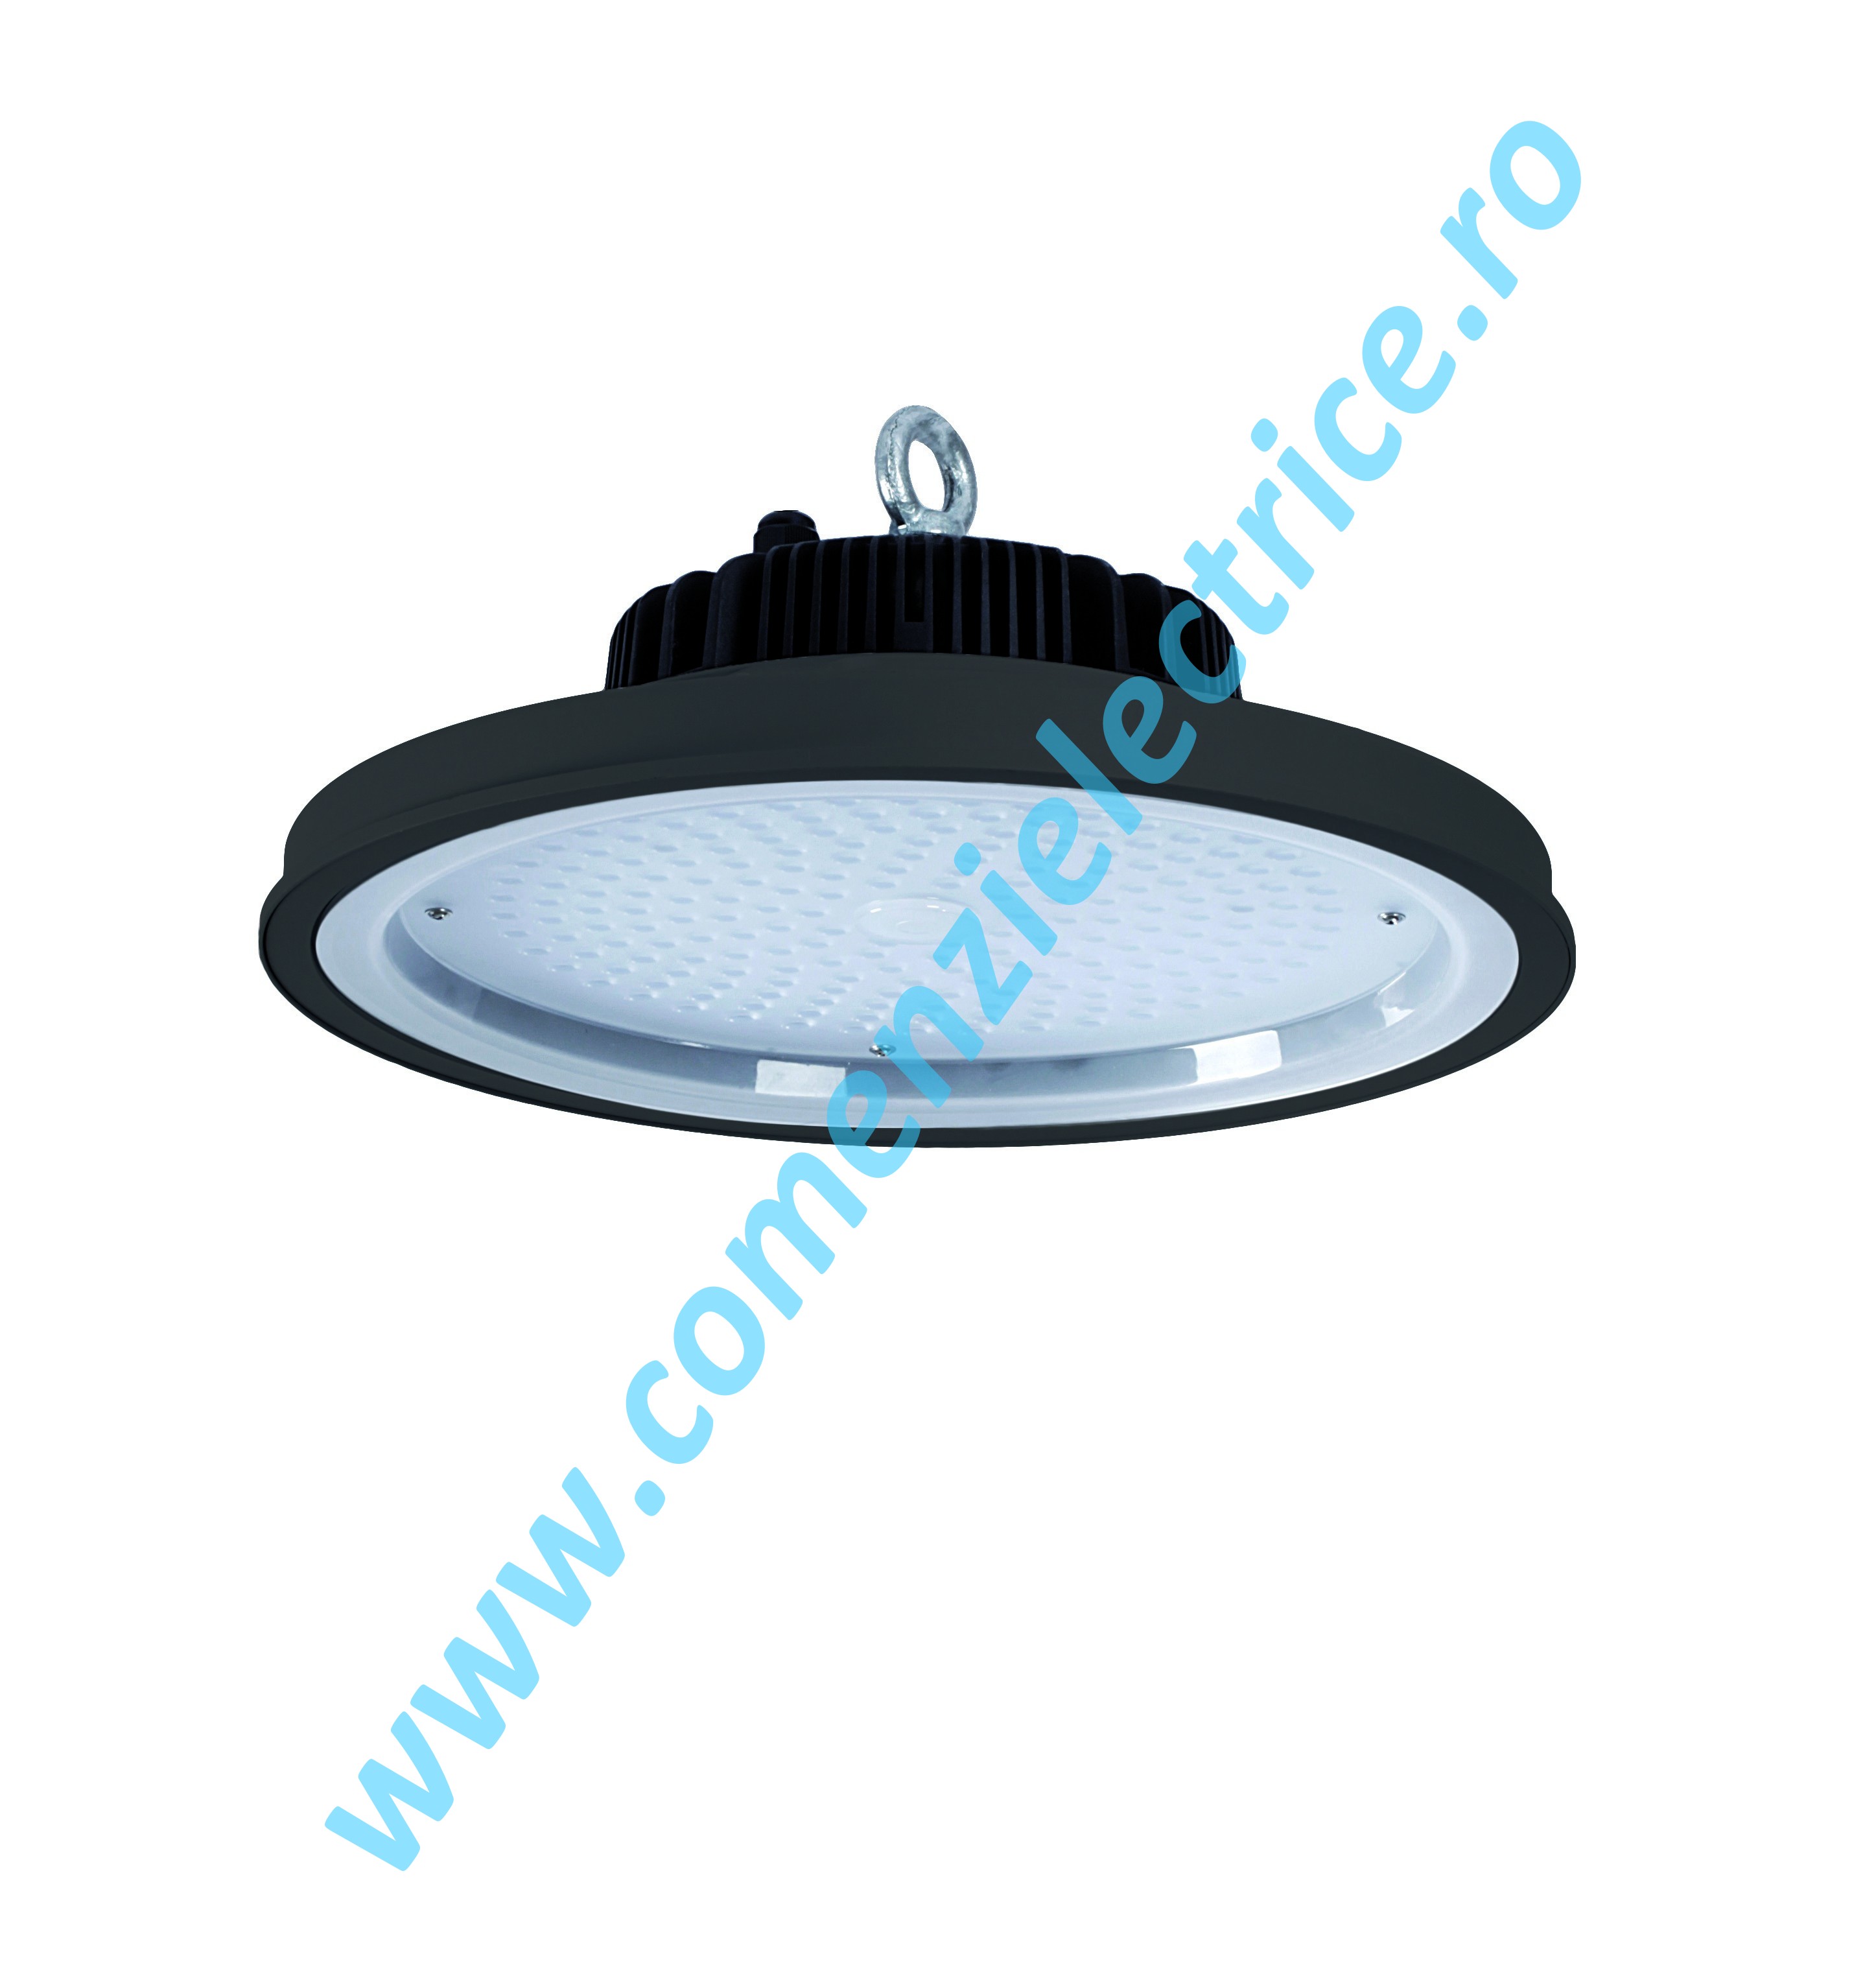 CORP DE ILUMINAT INDUSTRIAL LUCKY SMD LED 120W IP65